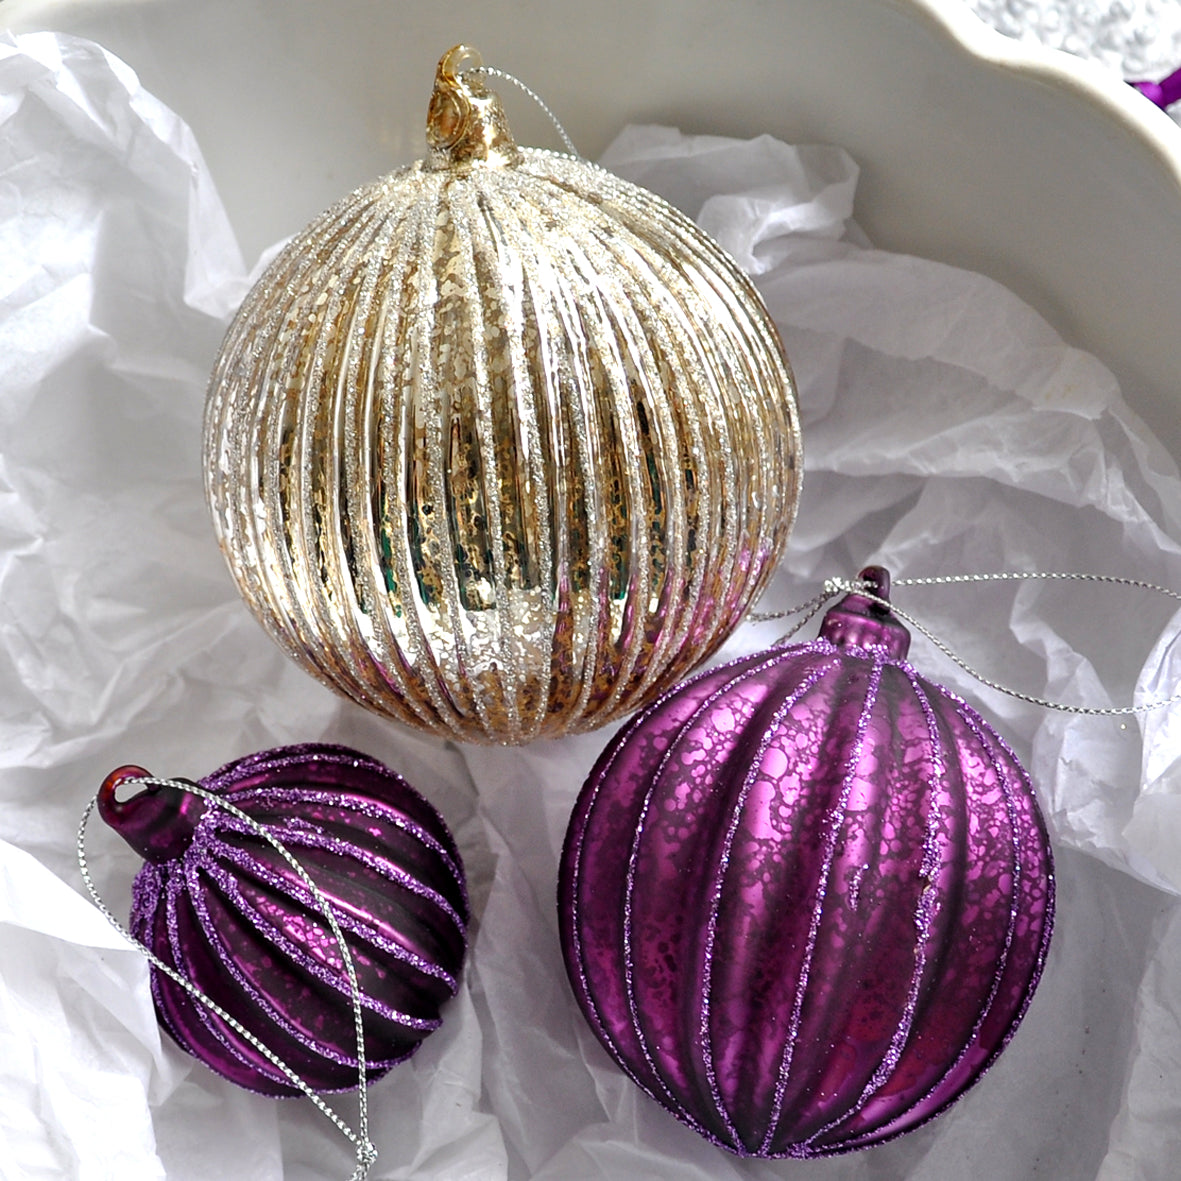 This glittery aubergine purple ridged Christmas bauble is made from glass.